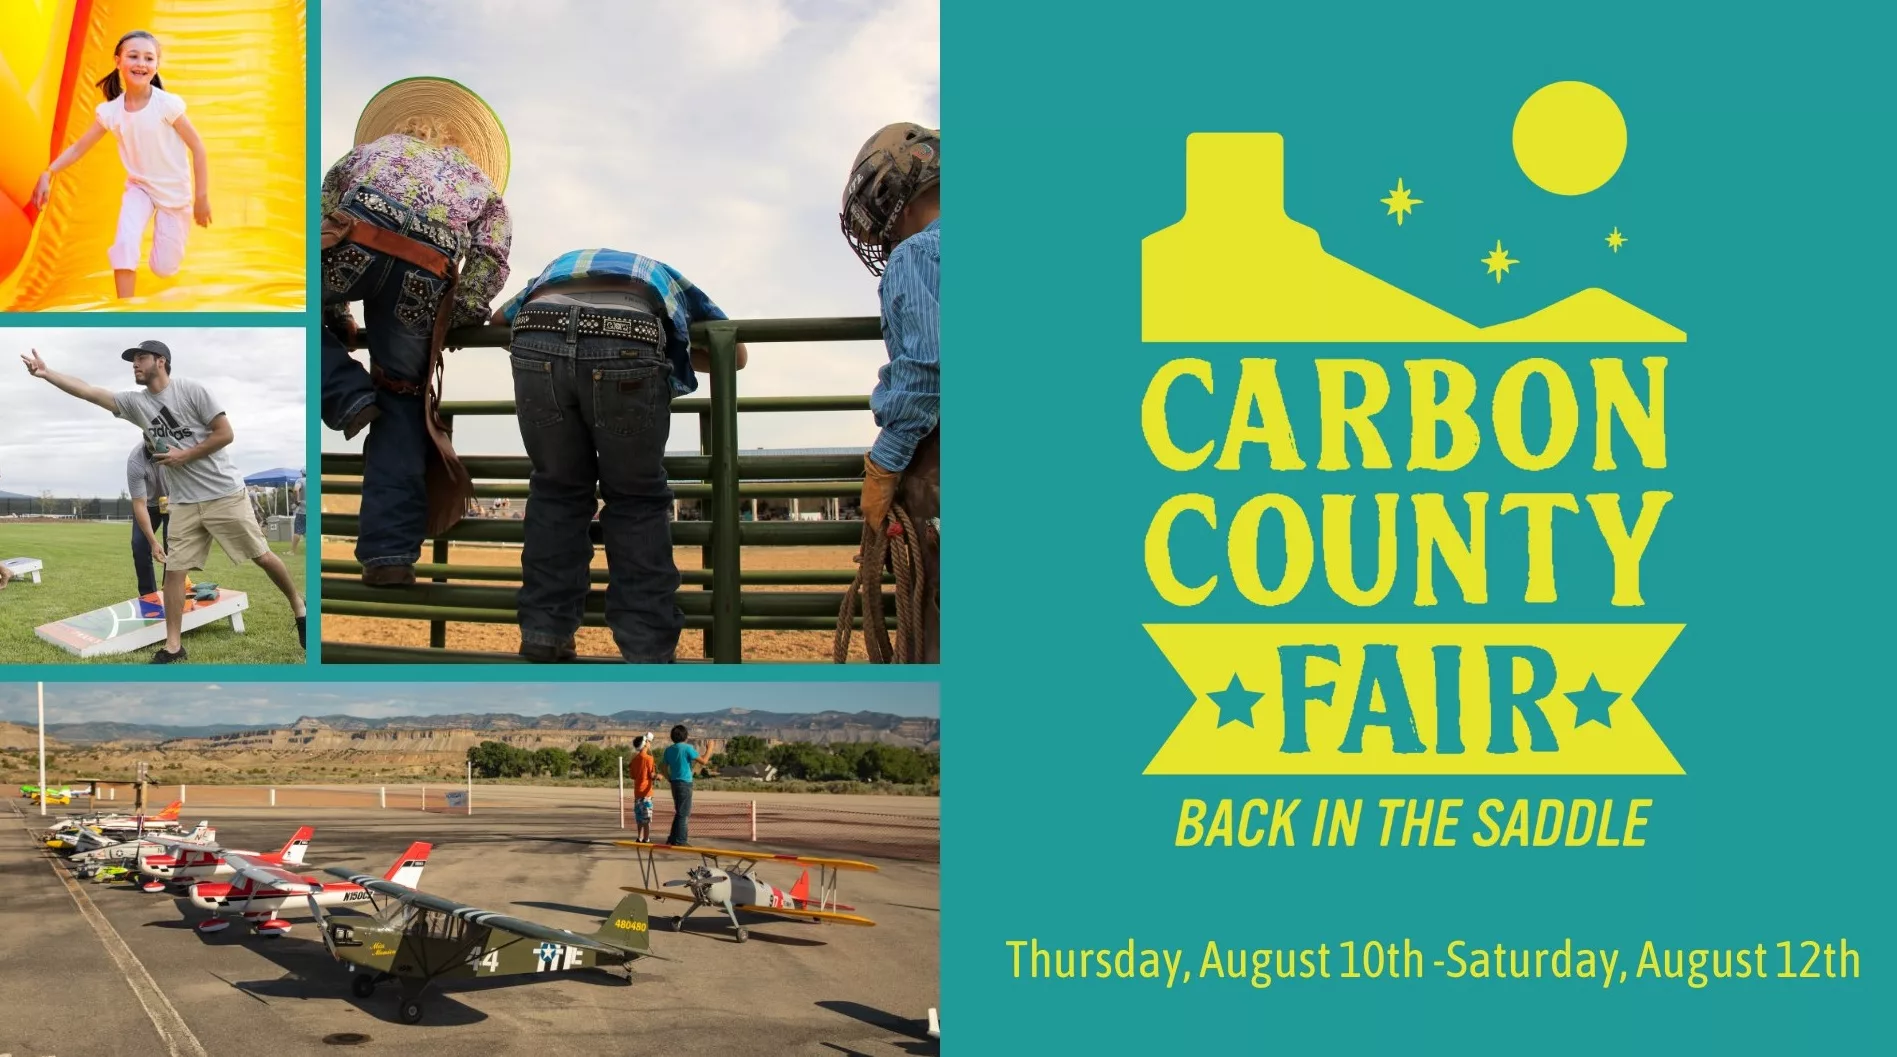 After 4year absence Carbon County Fair returns August 10 KOAl Price,UT